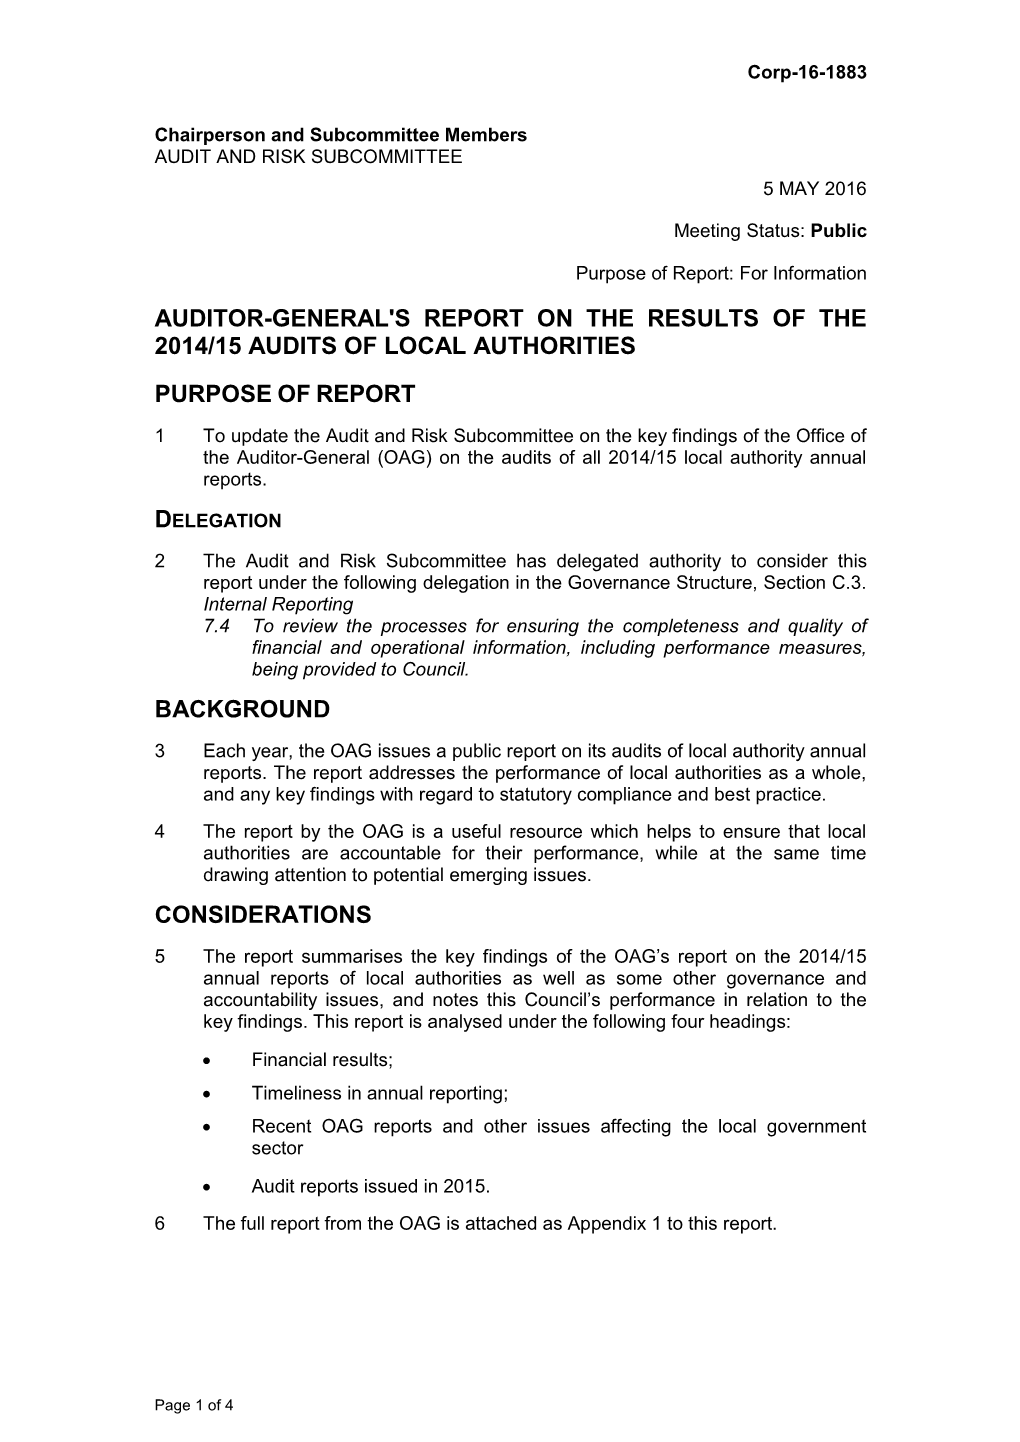 Auditor-General's Report on the Results of the 2014/15 Audits of Local Authorities Purpose of Report Background Considerations